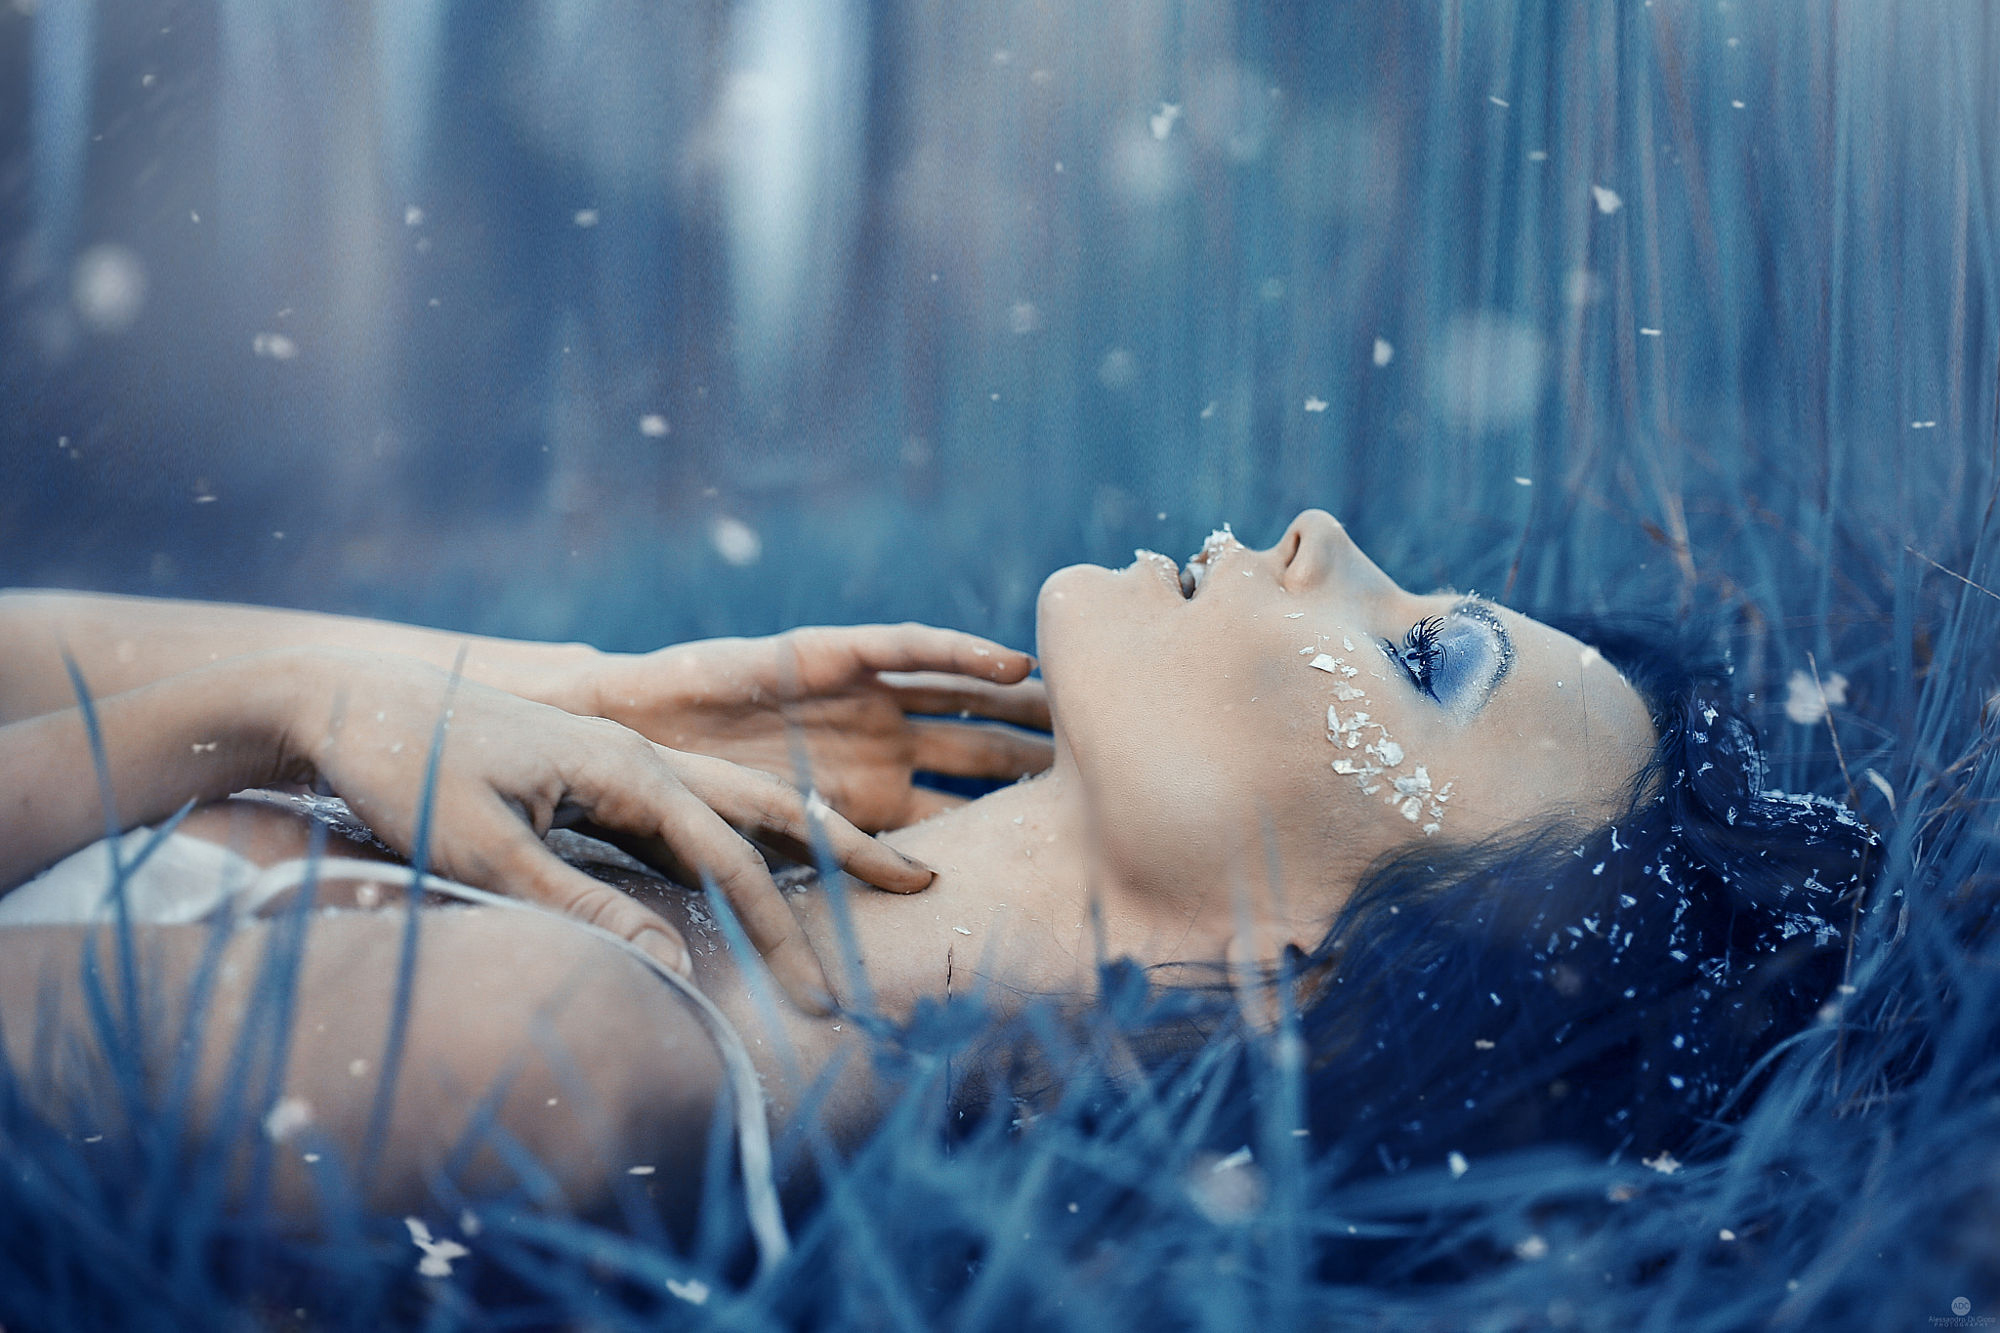 Women Long Hair Blue Hair Snow Nature Grass Hands On Chest Make Up Fashion Alessandro Di Cicco 2000x1333